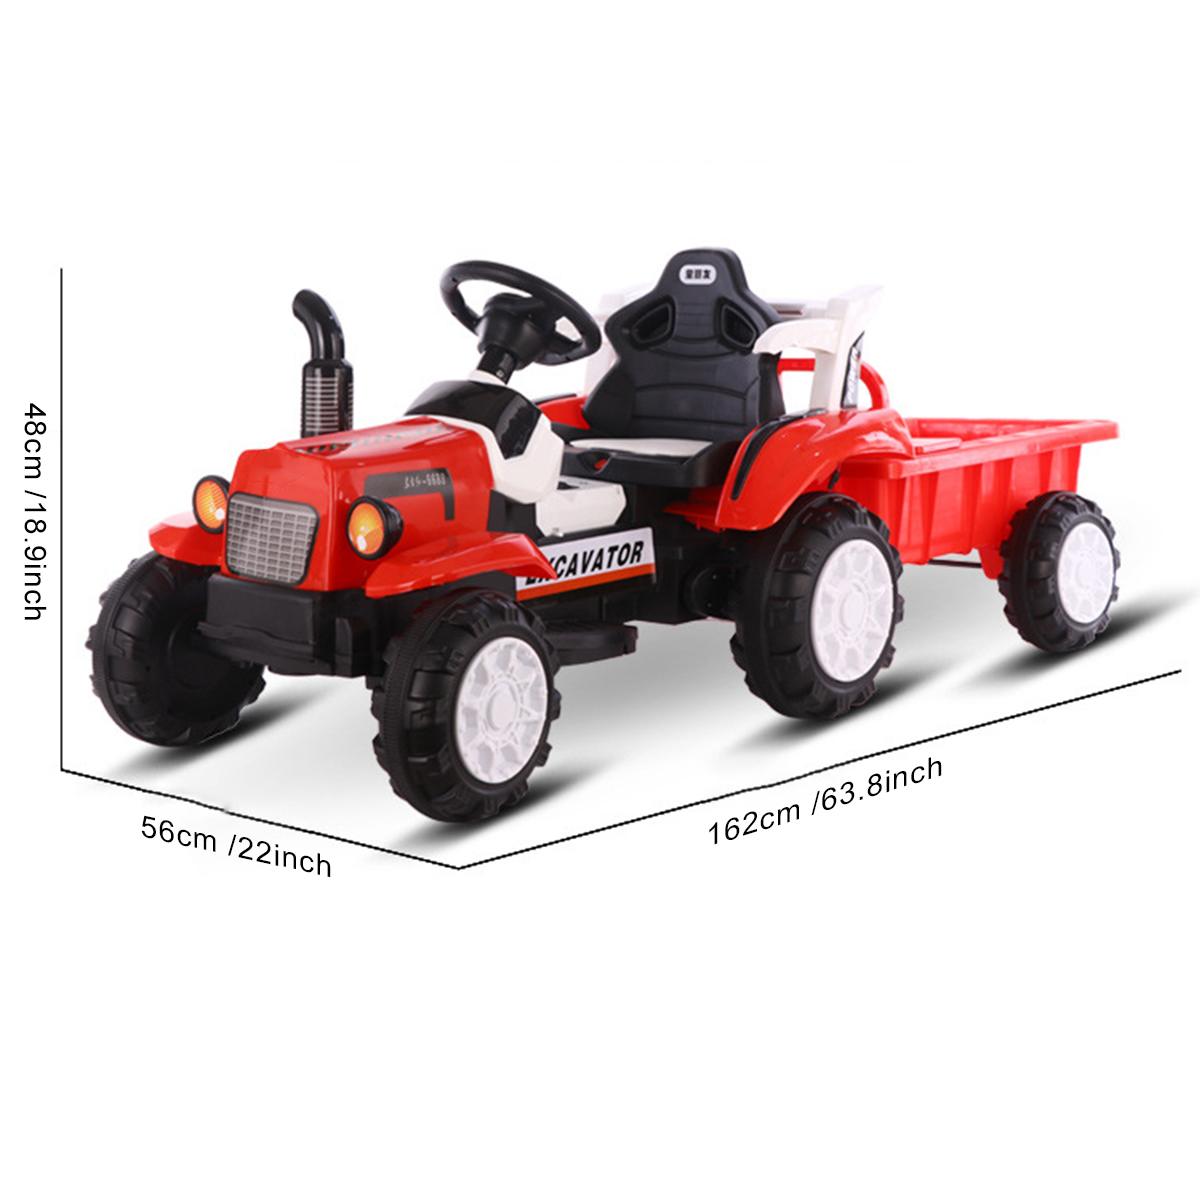 Kimbosmart Electric Cars Vehicles For Children Powered Ride on Cars Toys for Kids 6V Electric Tractor with Detachable Trailer - lebenoutdoors